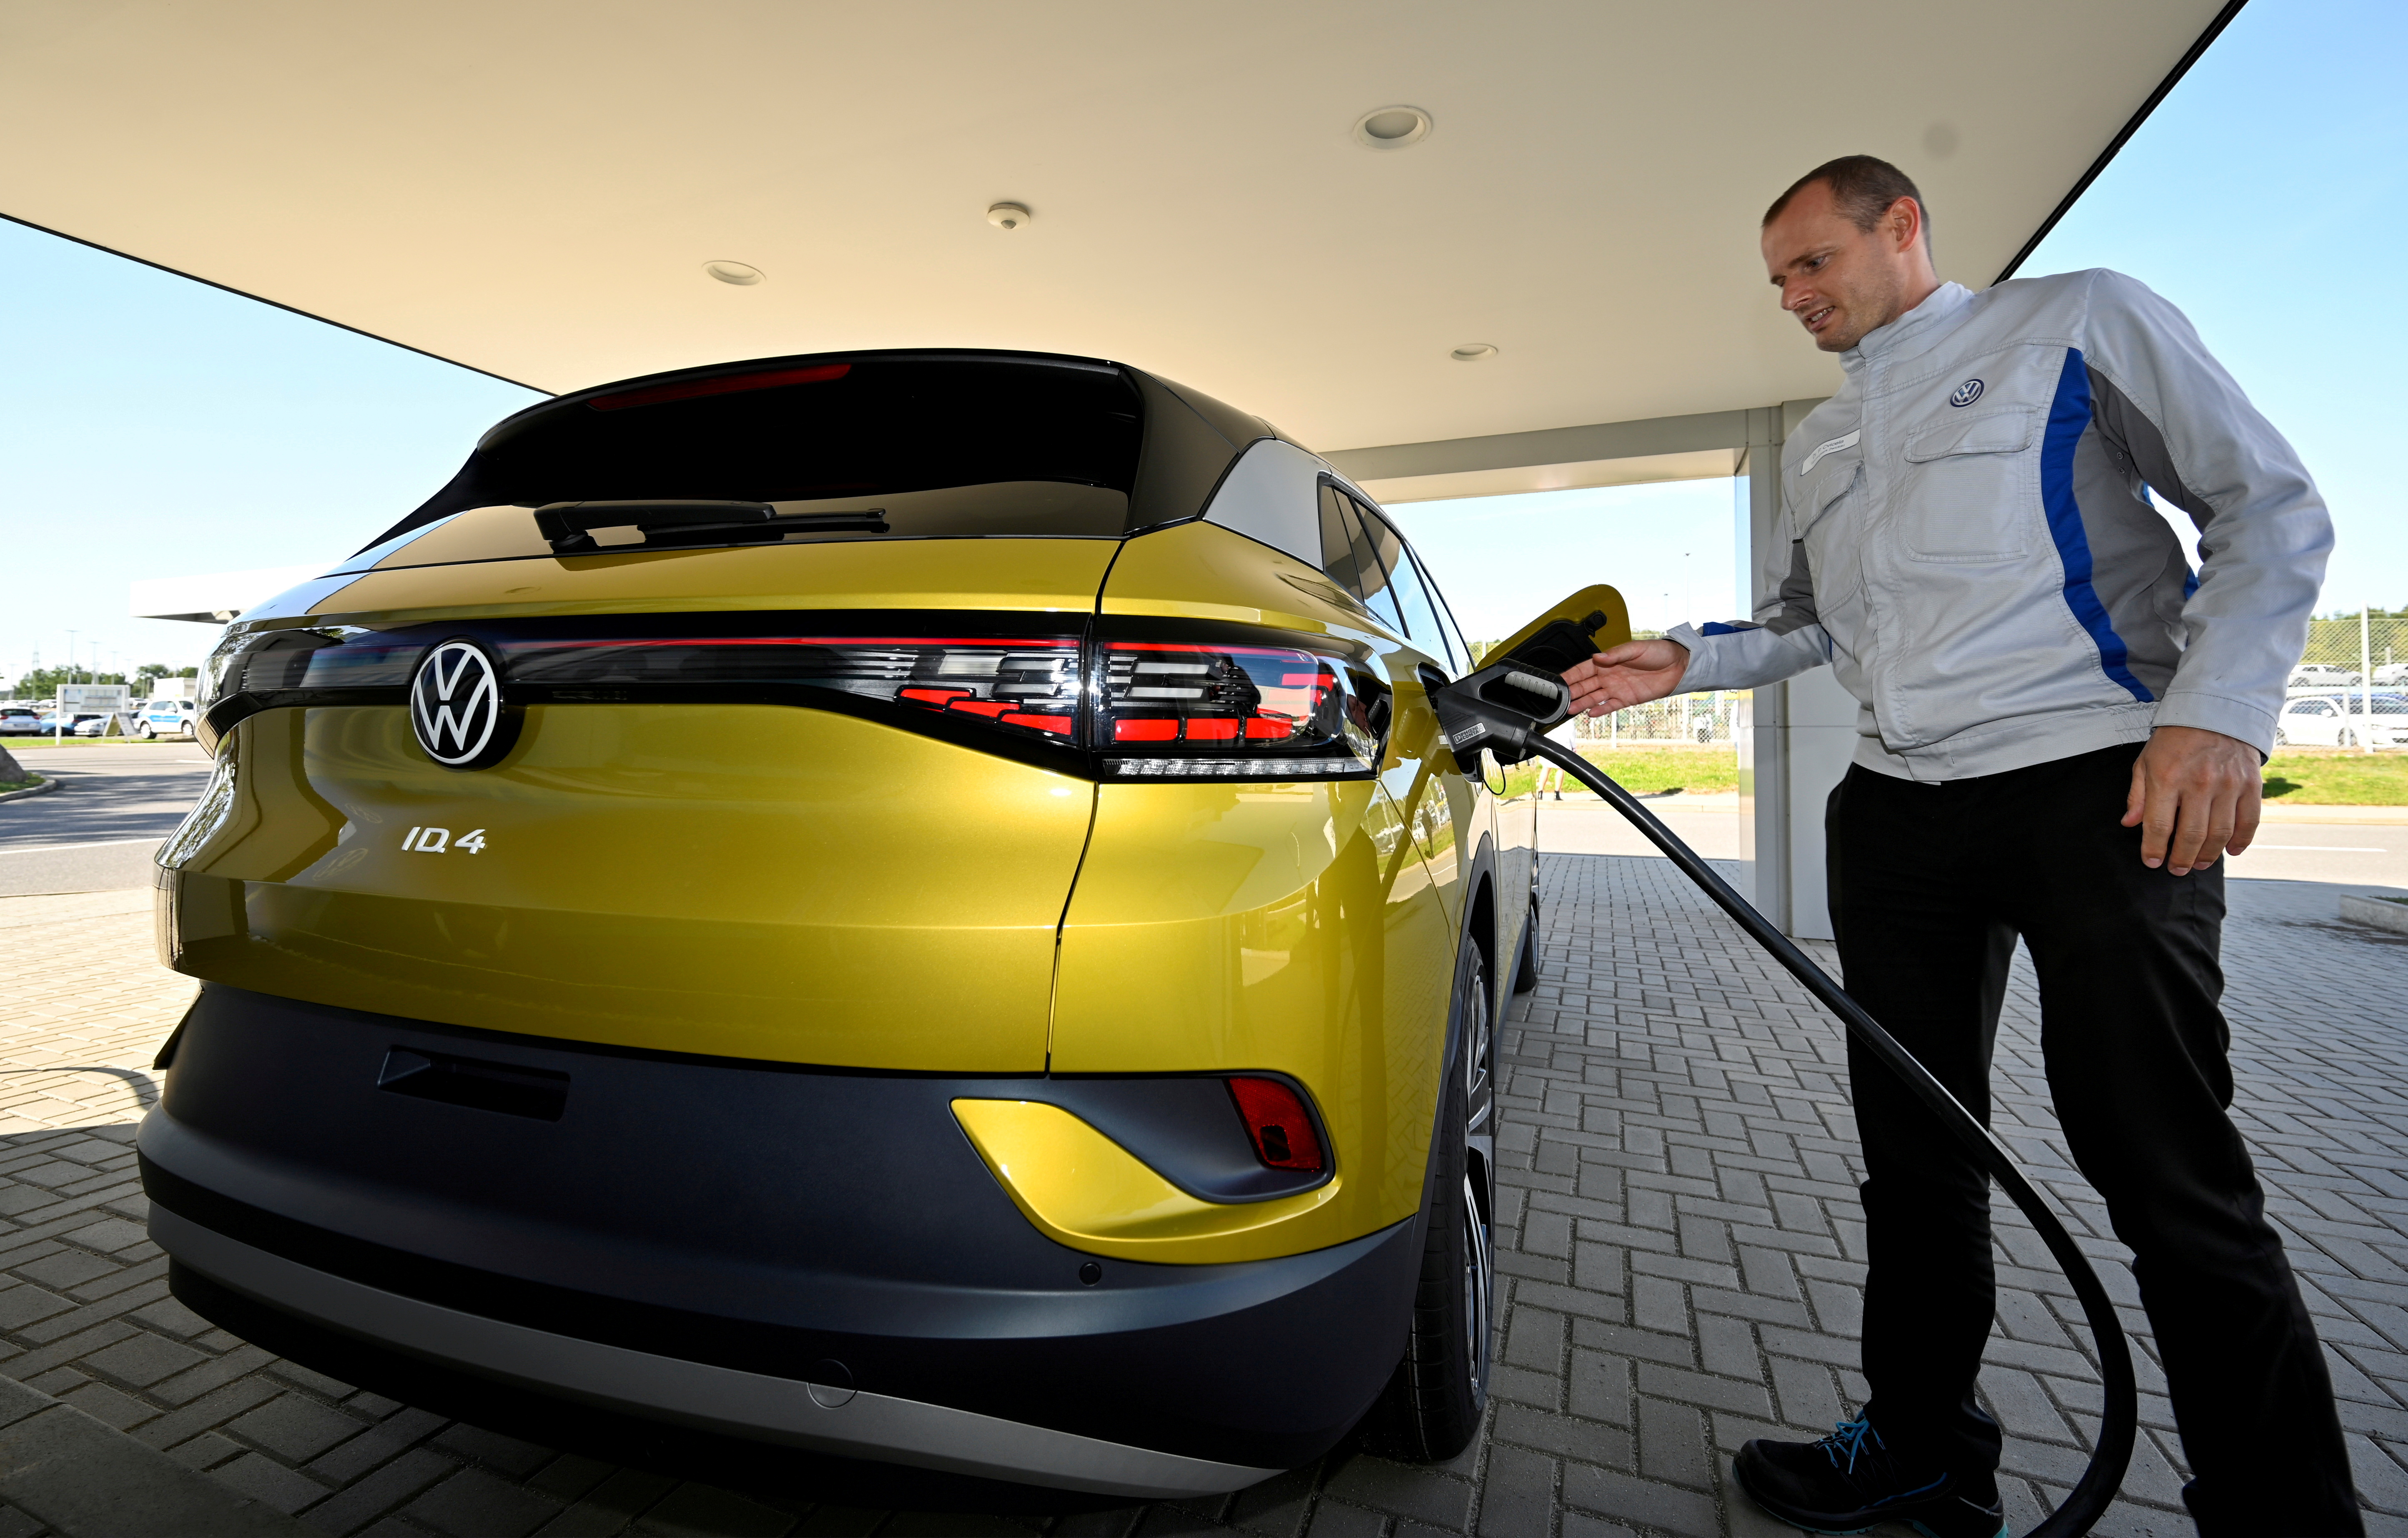 VW shows electric SUV ID.4 during a photo workshop